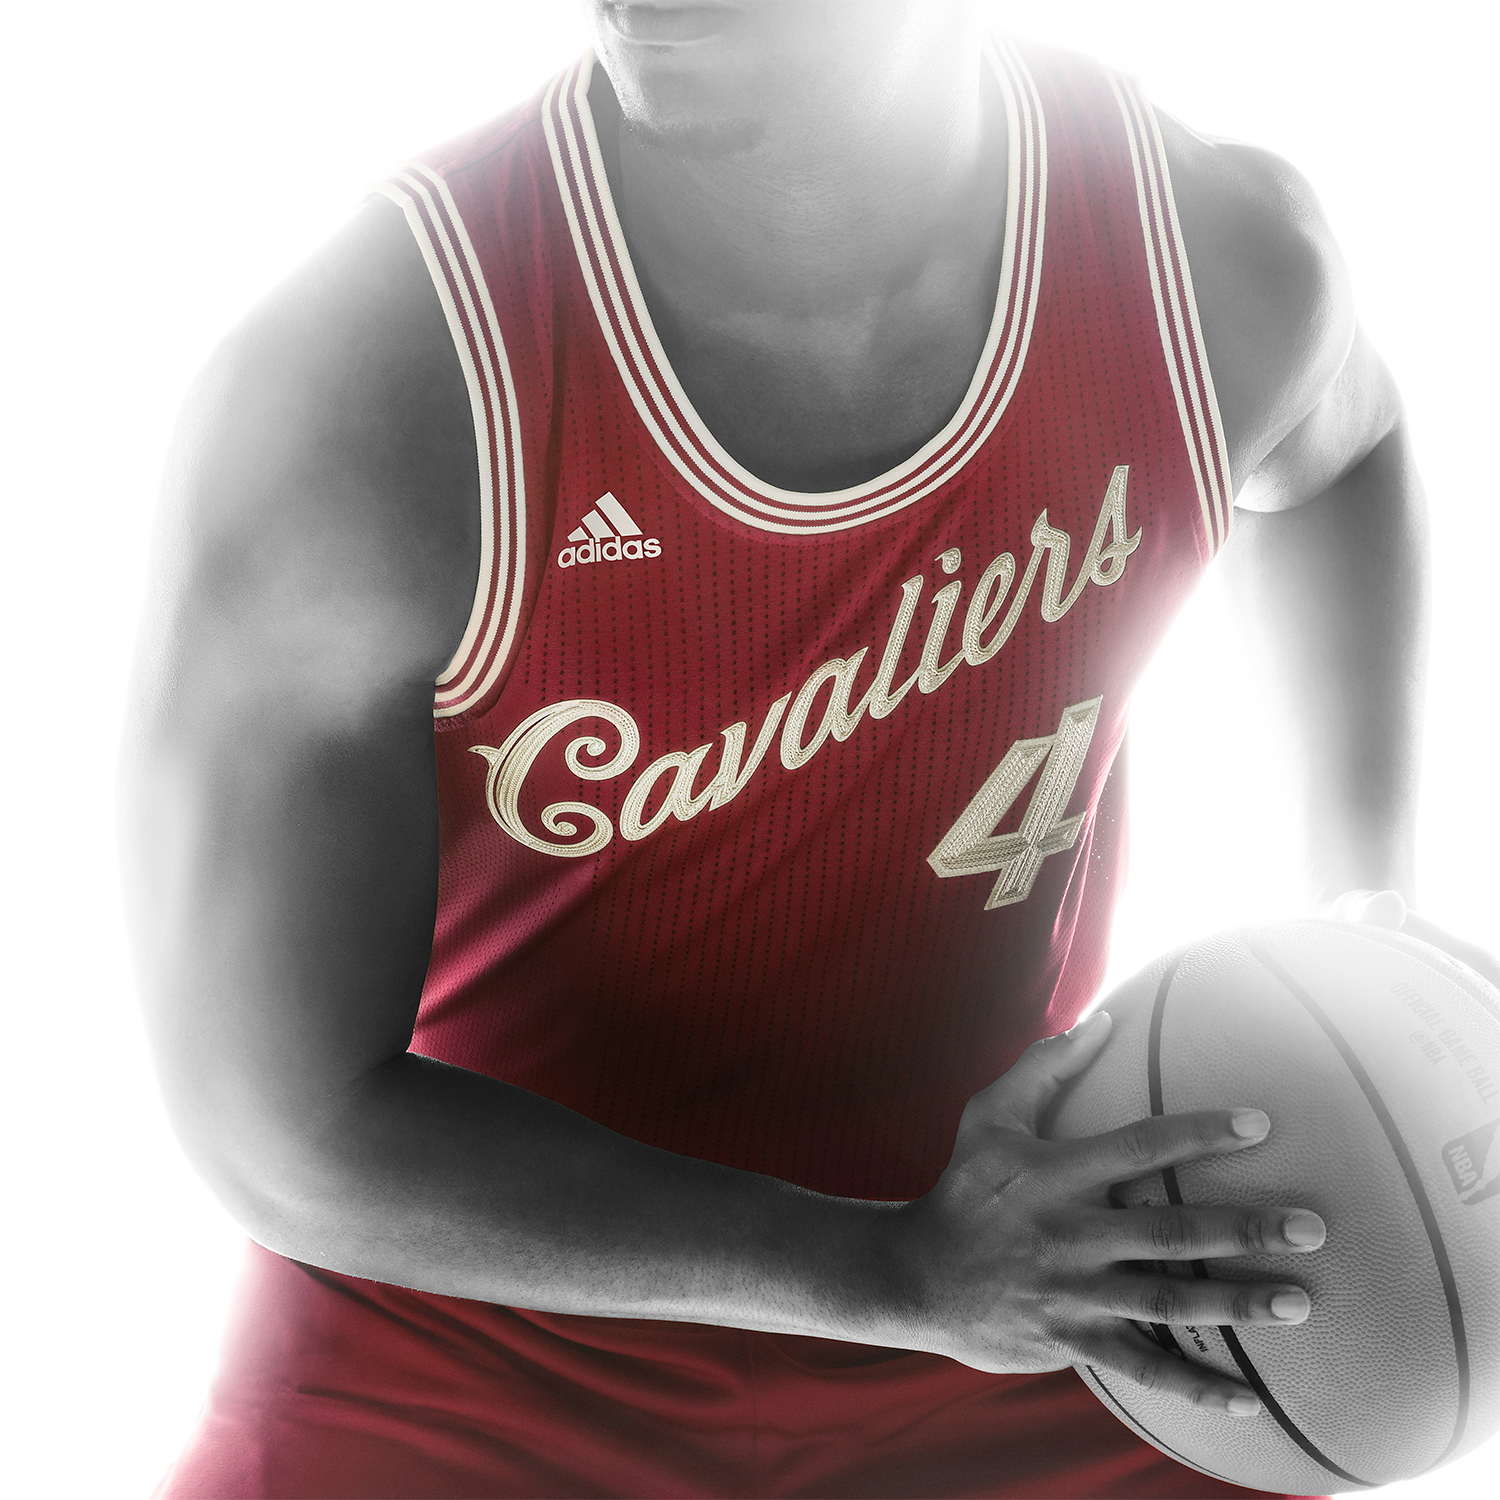 Christmas Day NBA jerseys unveiled for 2012 games